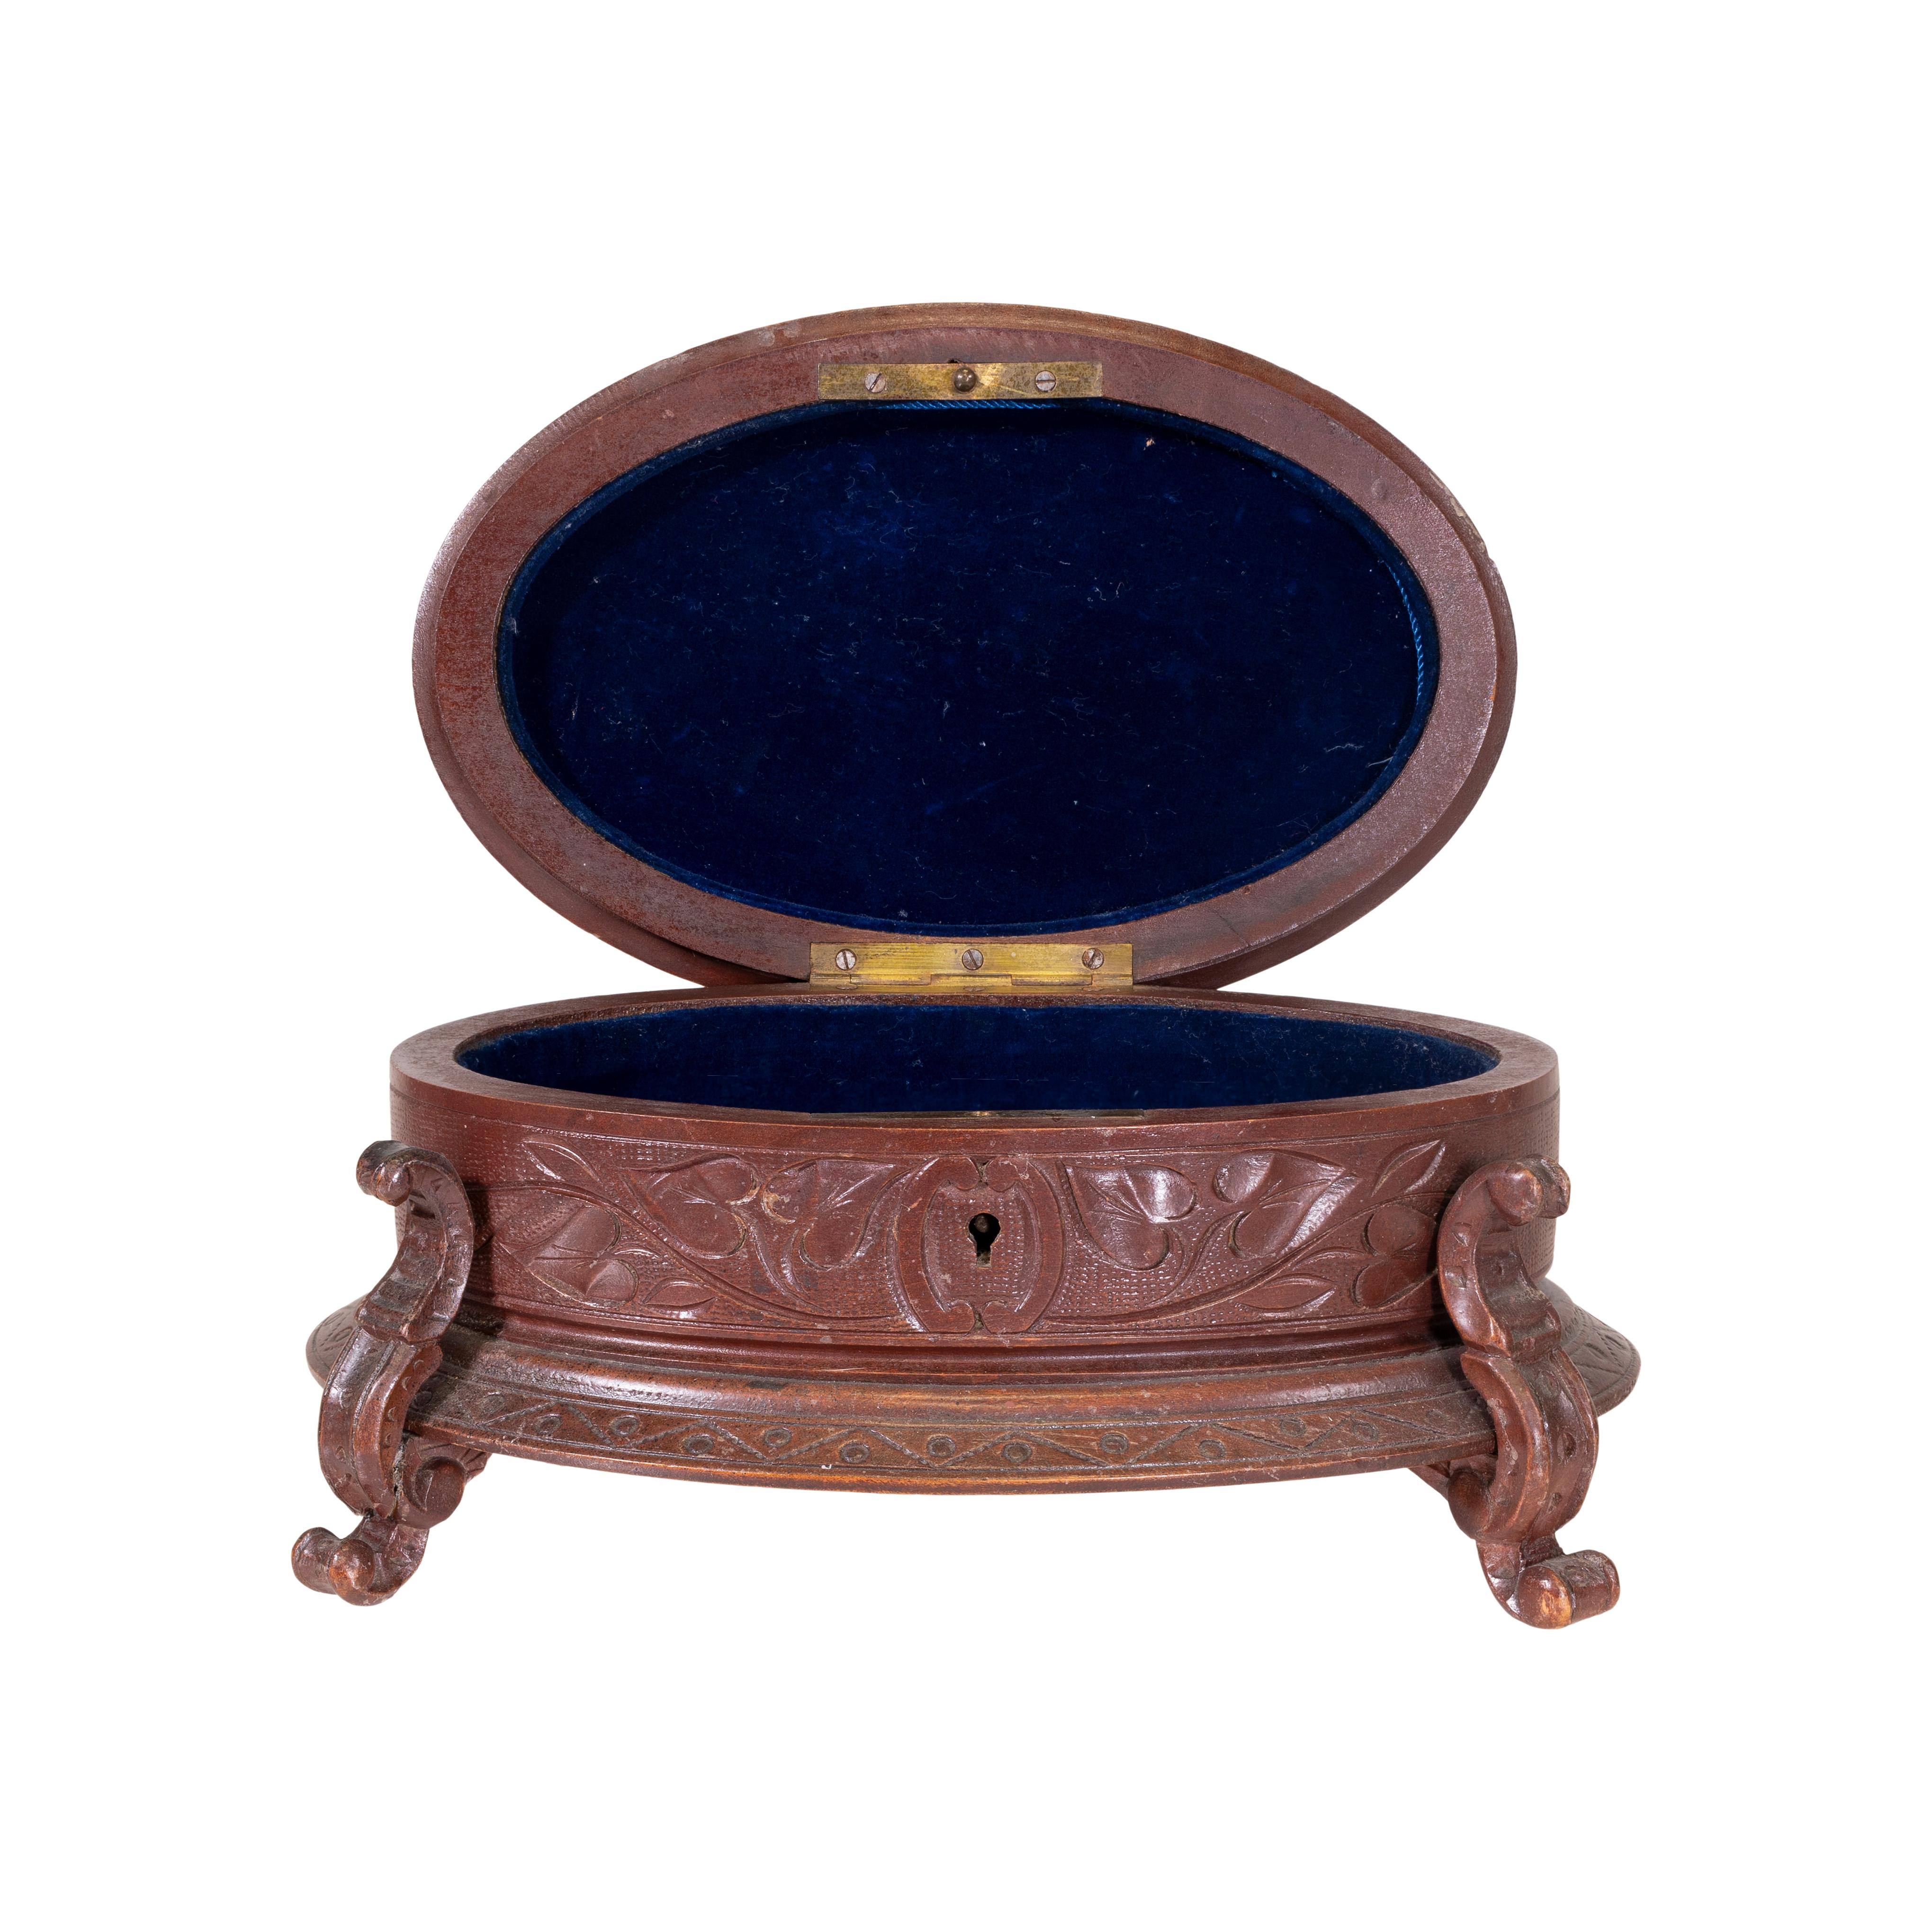 Footed oval Black Forest jewelry box with floral finials. Stunning piece.

Origin: Switzerland, circa 1900 

Dimensions: 8